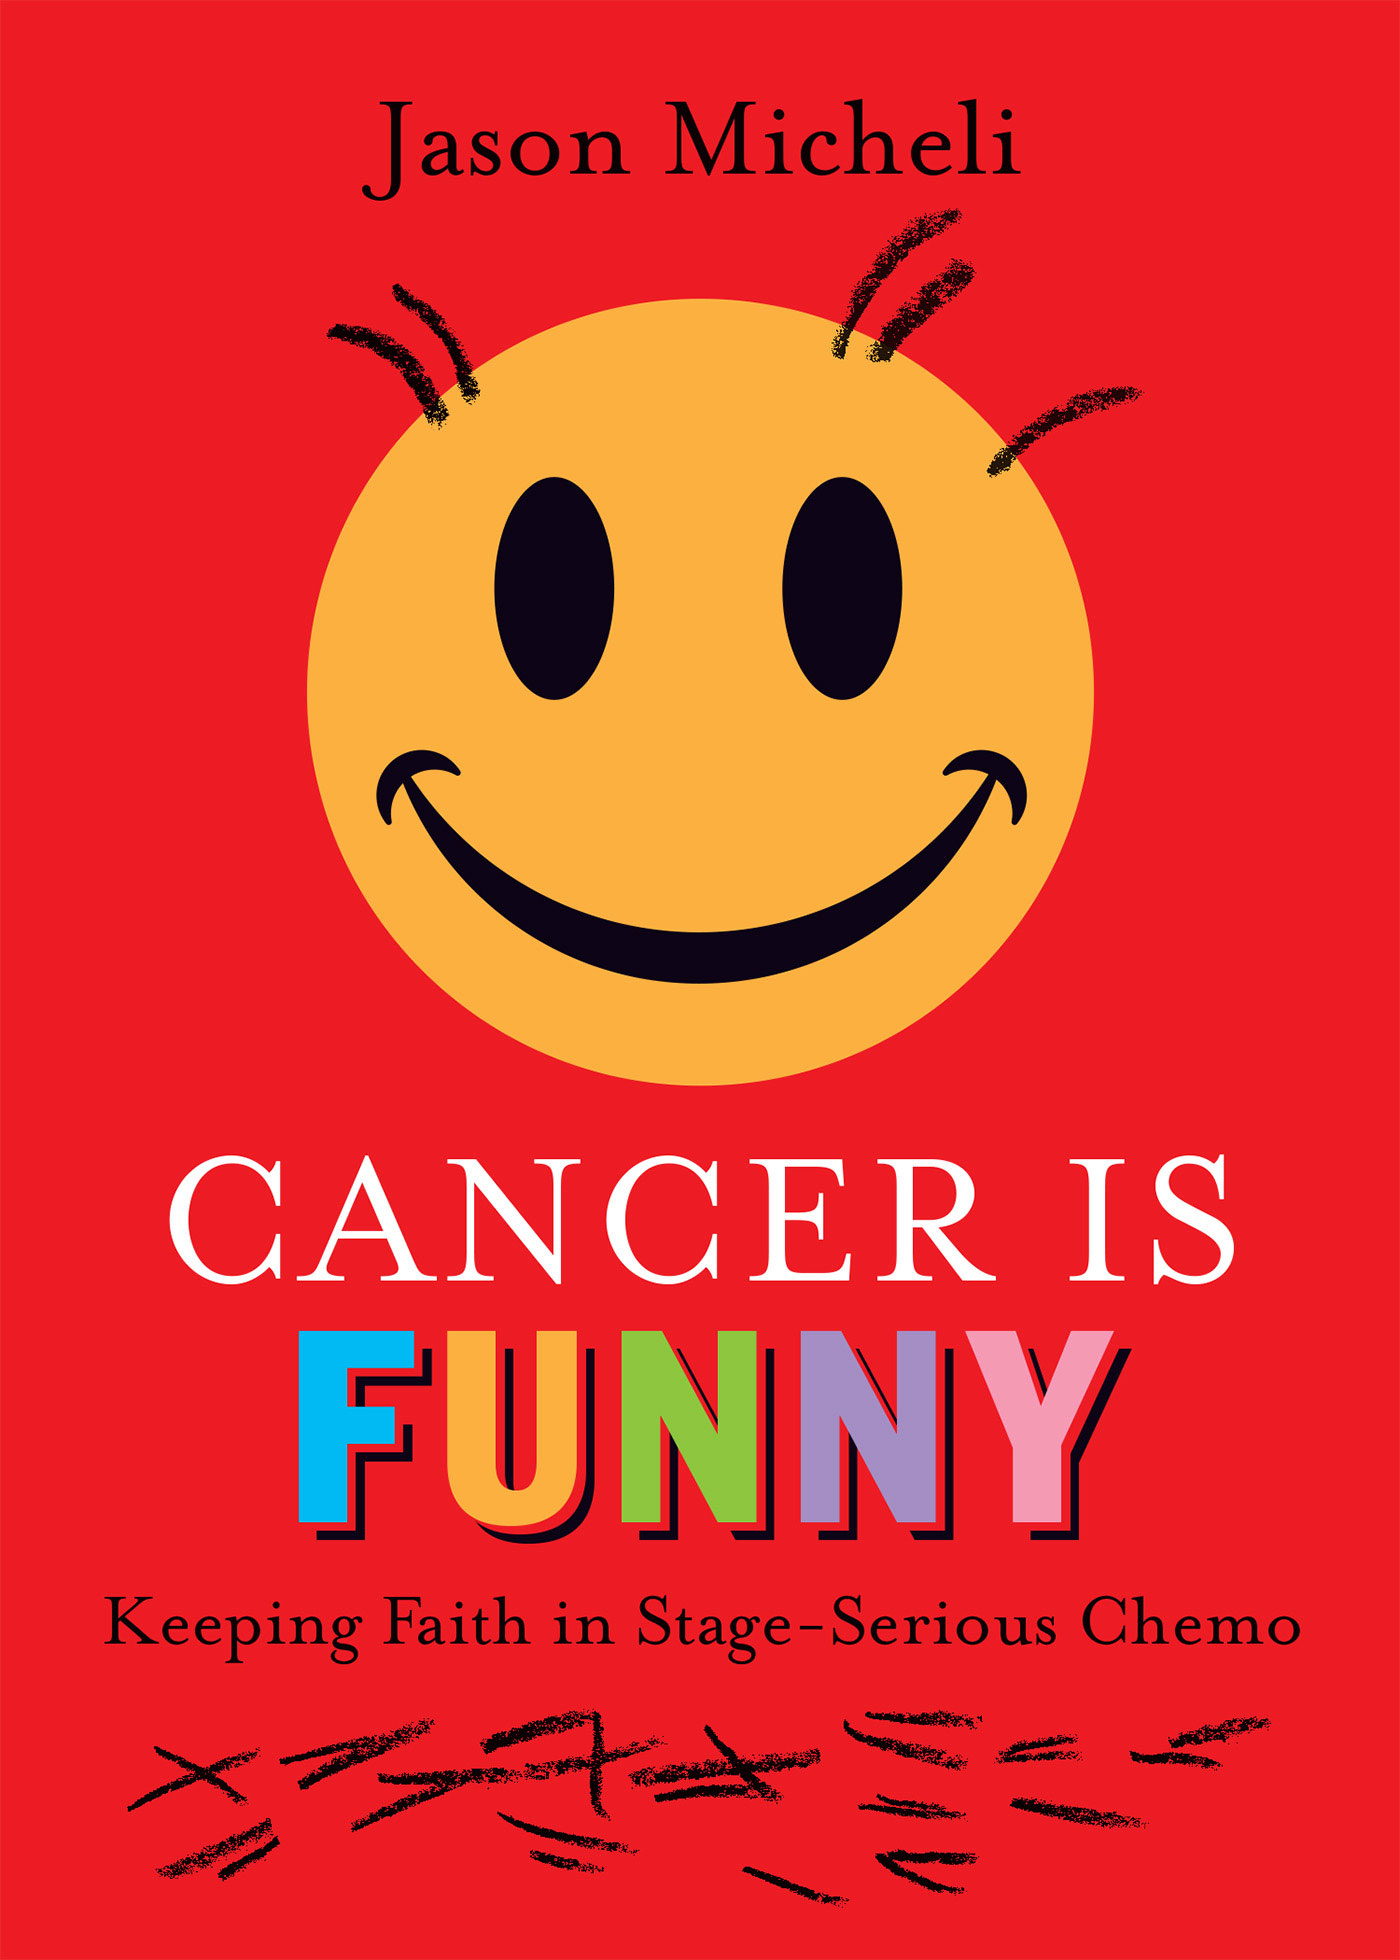 cancer is funny - good.jpg